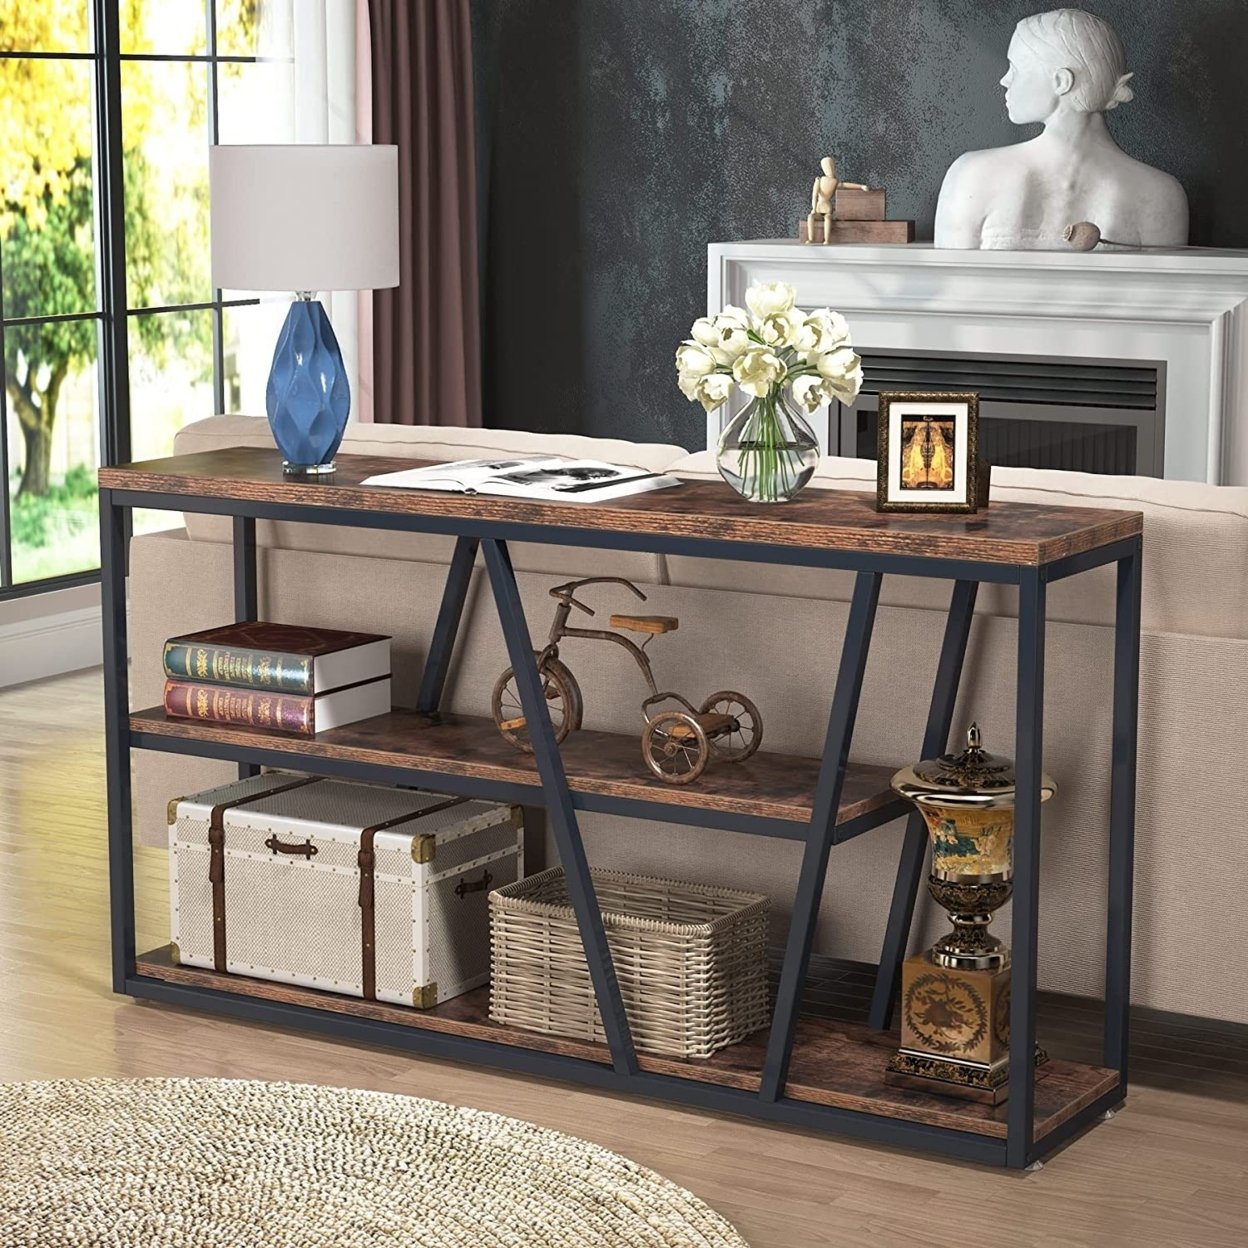 Tribesigns Console Table, Industrial Sofa Table With Shelves, 3-Tier Entryway Table With Storage